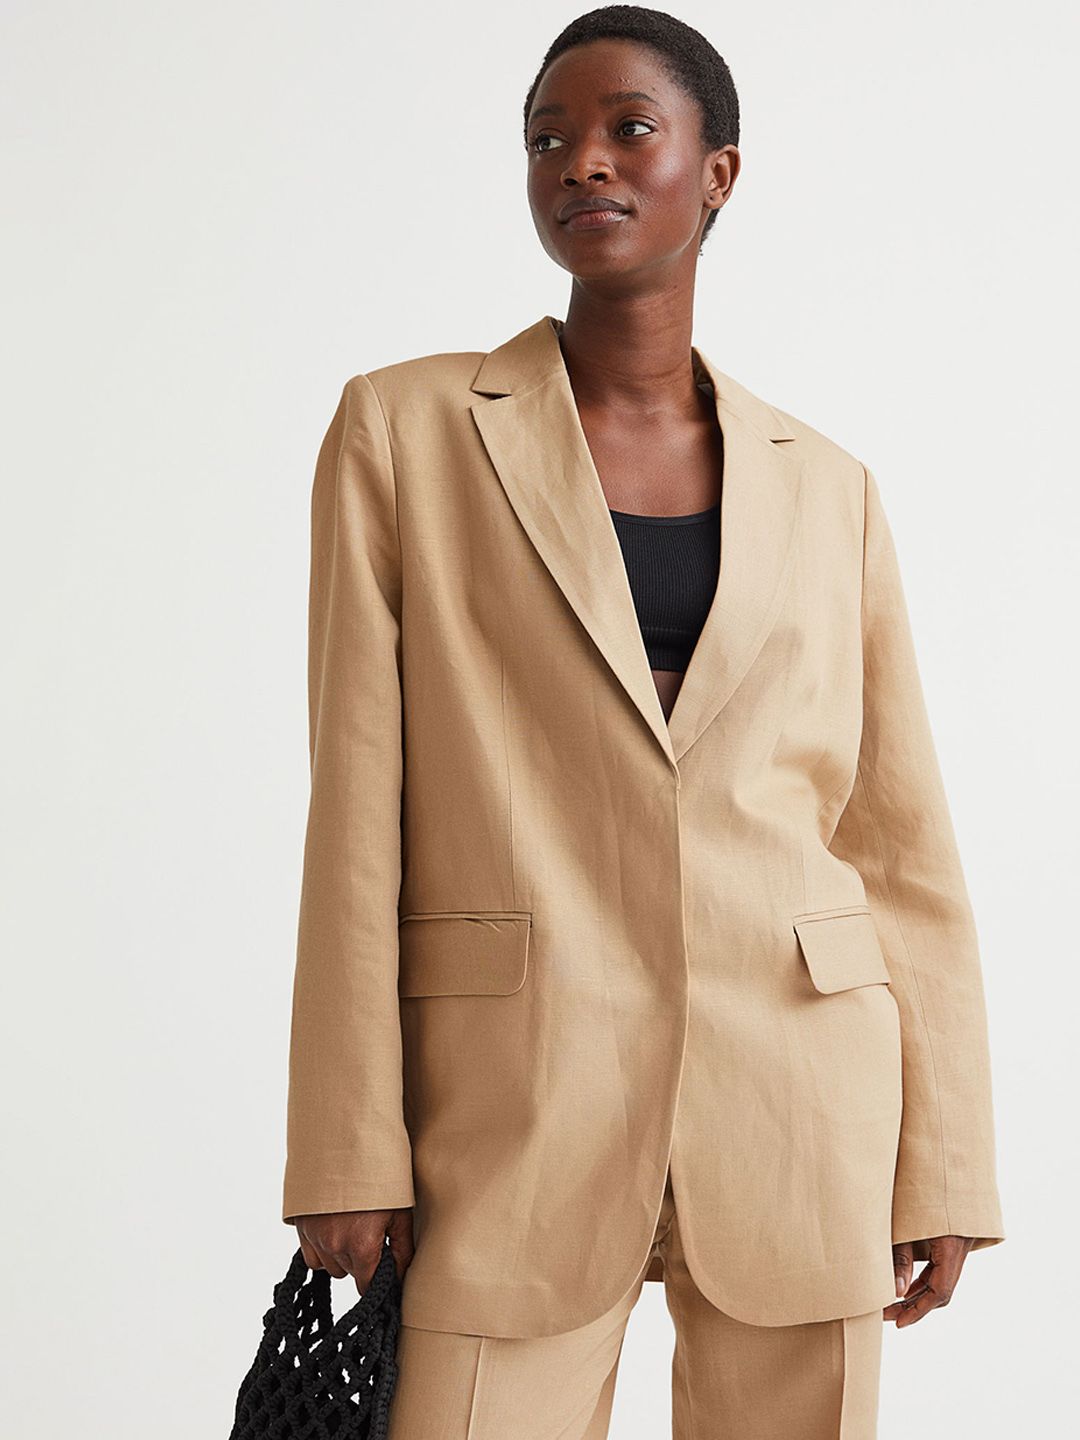 H&M Women Beige Solid Single-Breasted Blazer Price in India